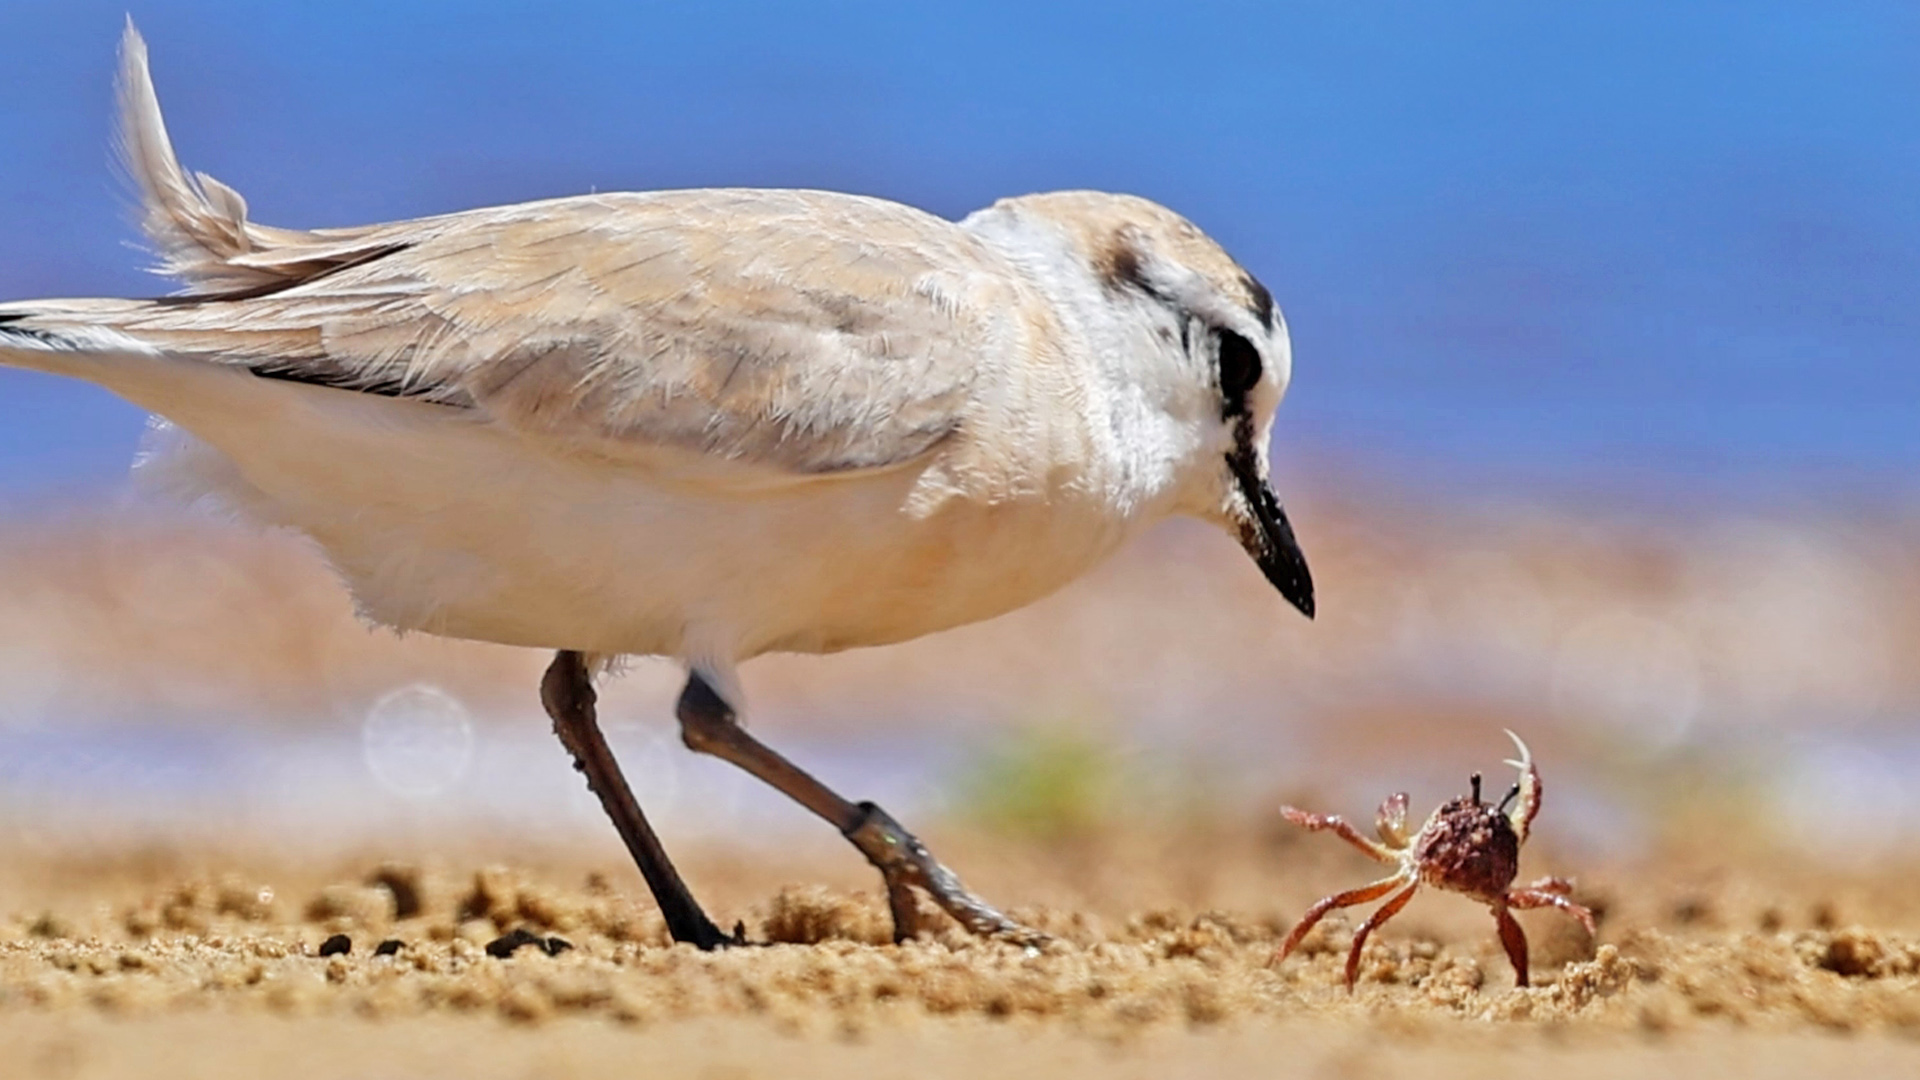 Brave Crab Fights for Its Life Against Big Bird